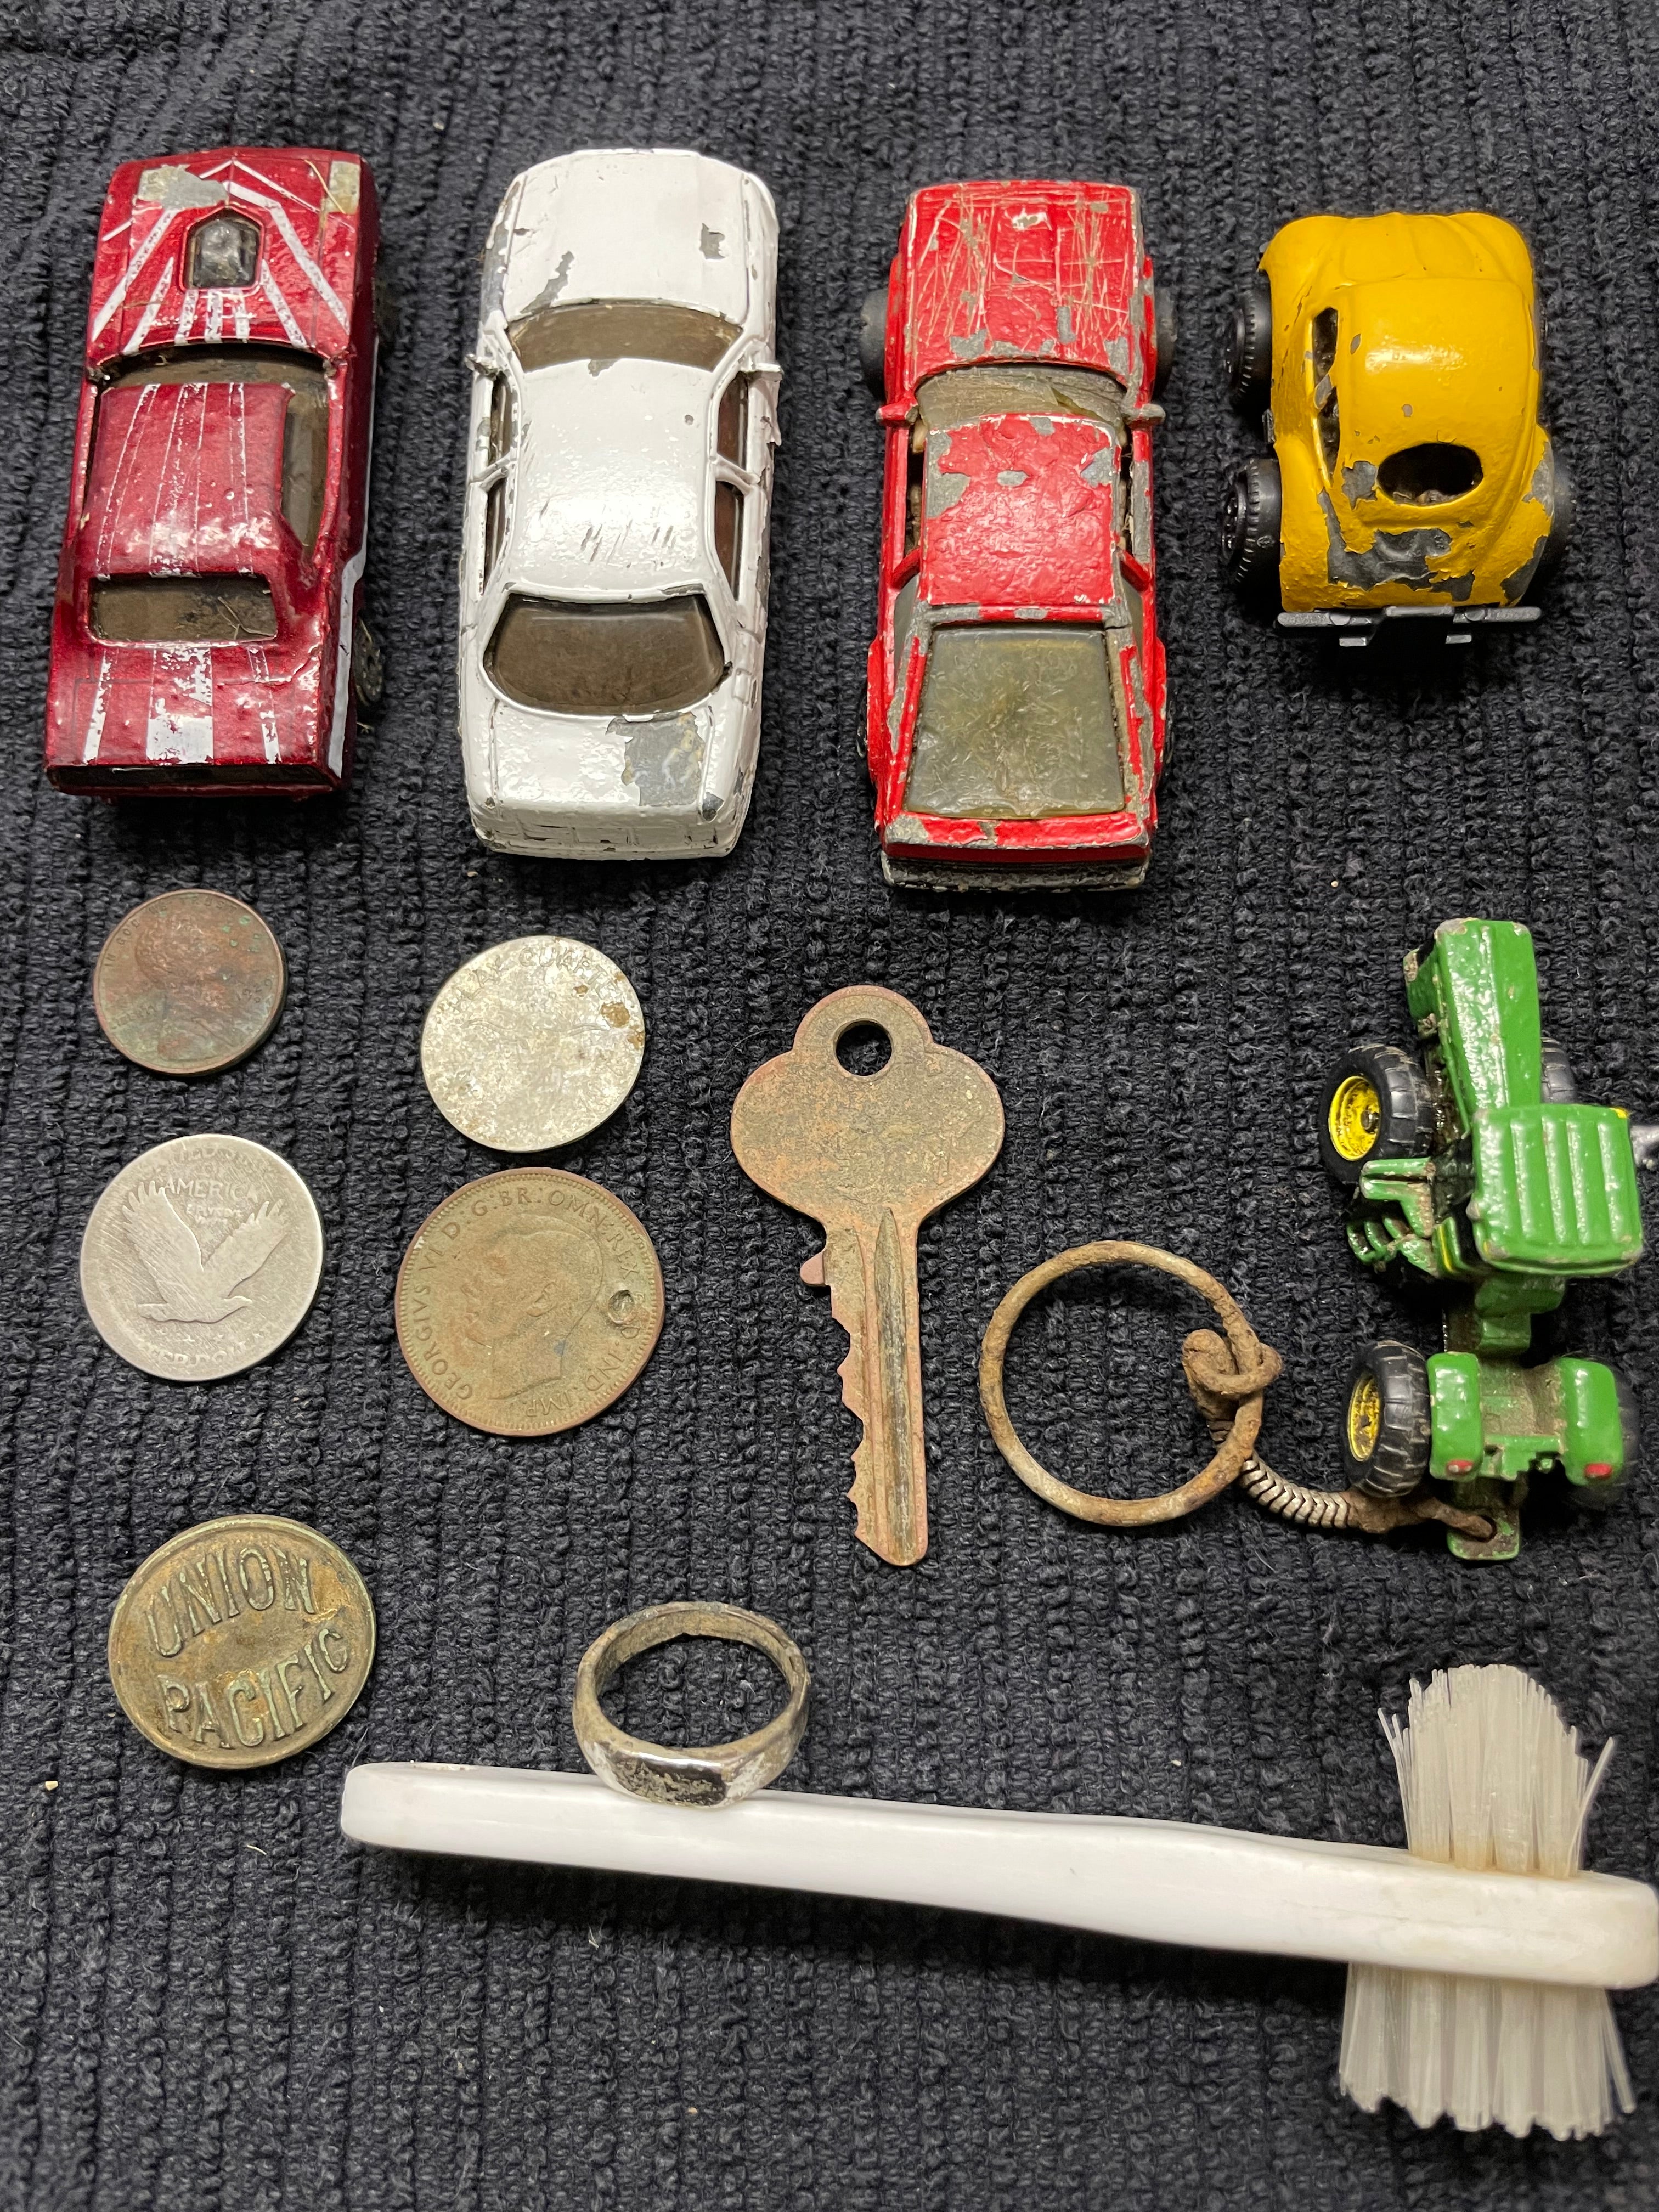 Finding Silver and Cars with Keys Beneath the Earth in Kansas City